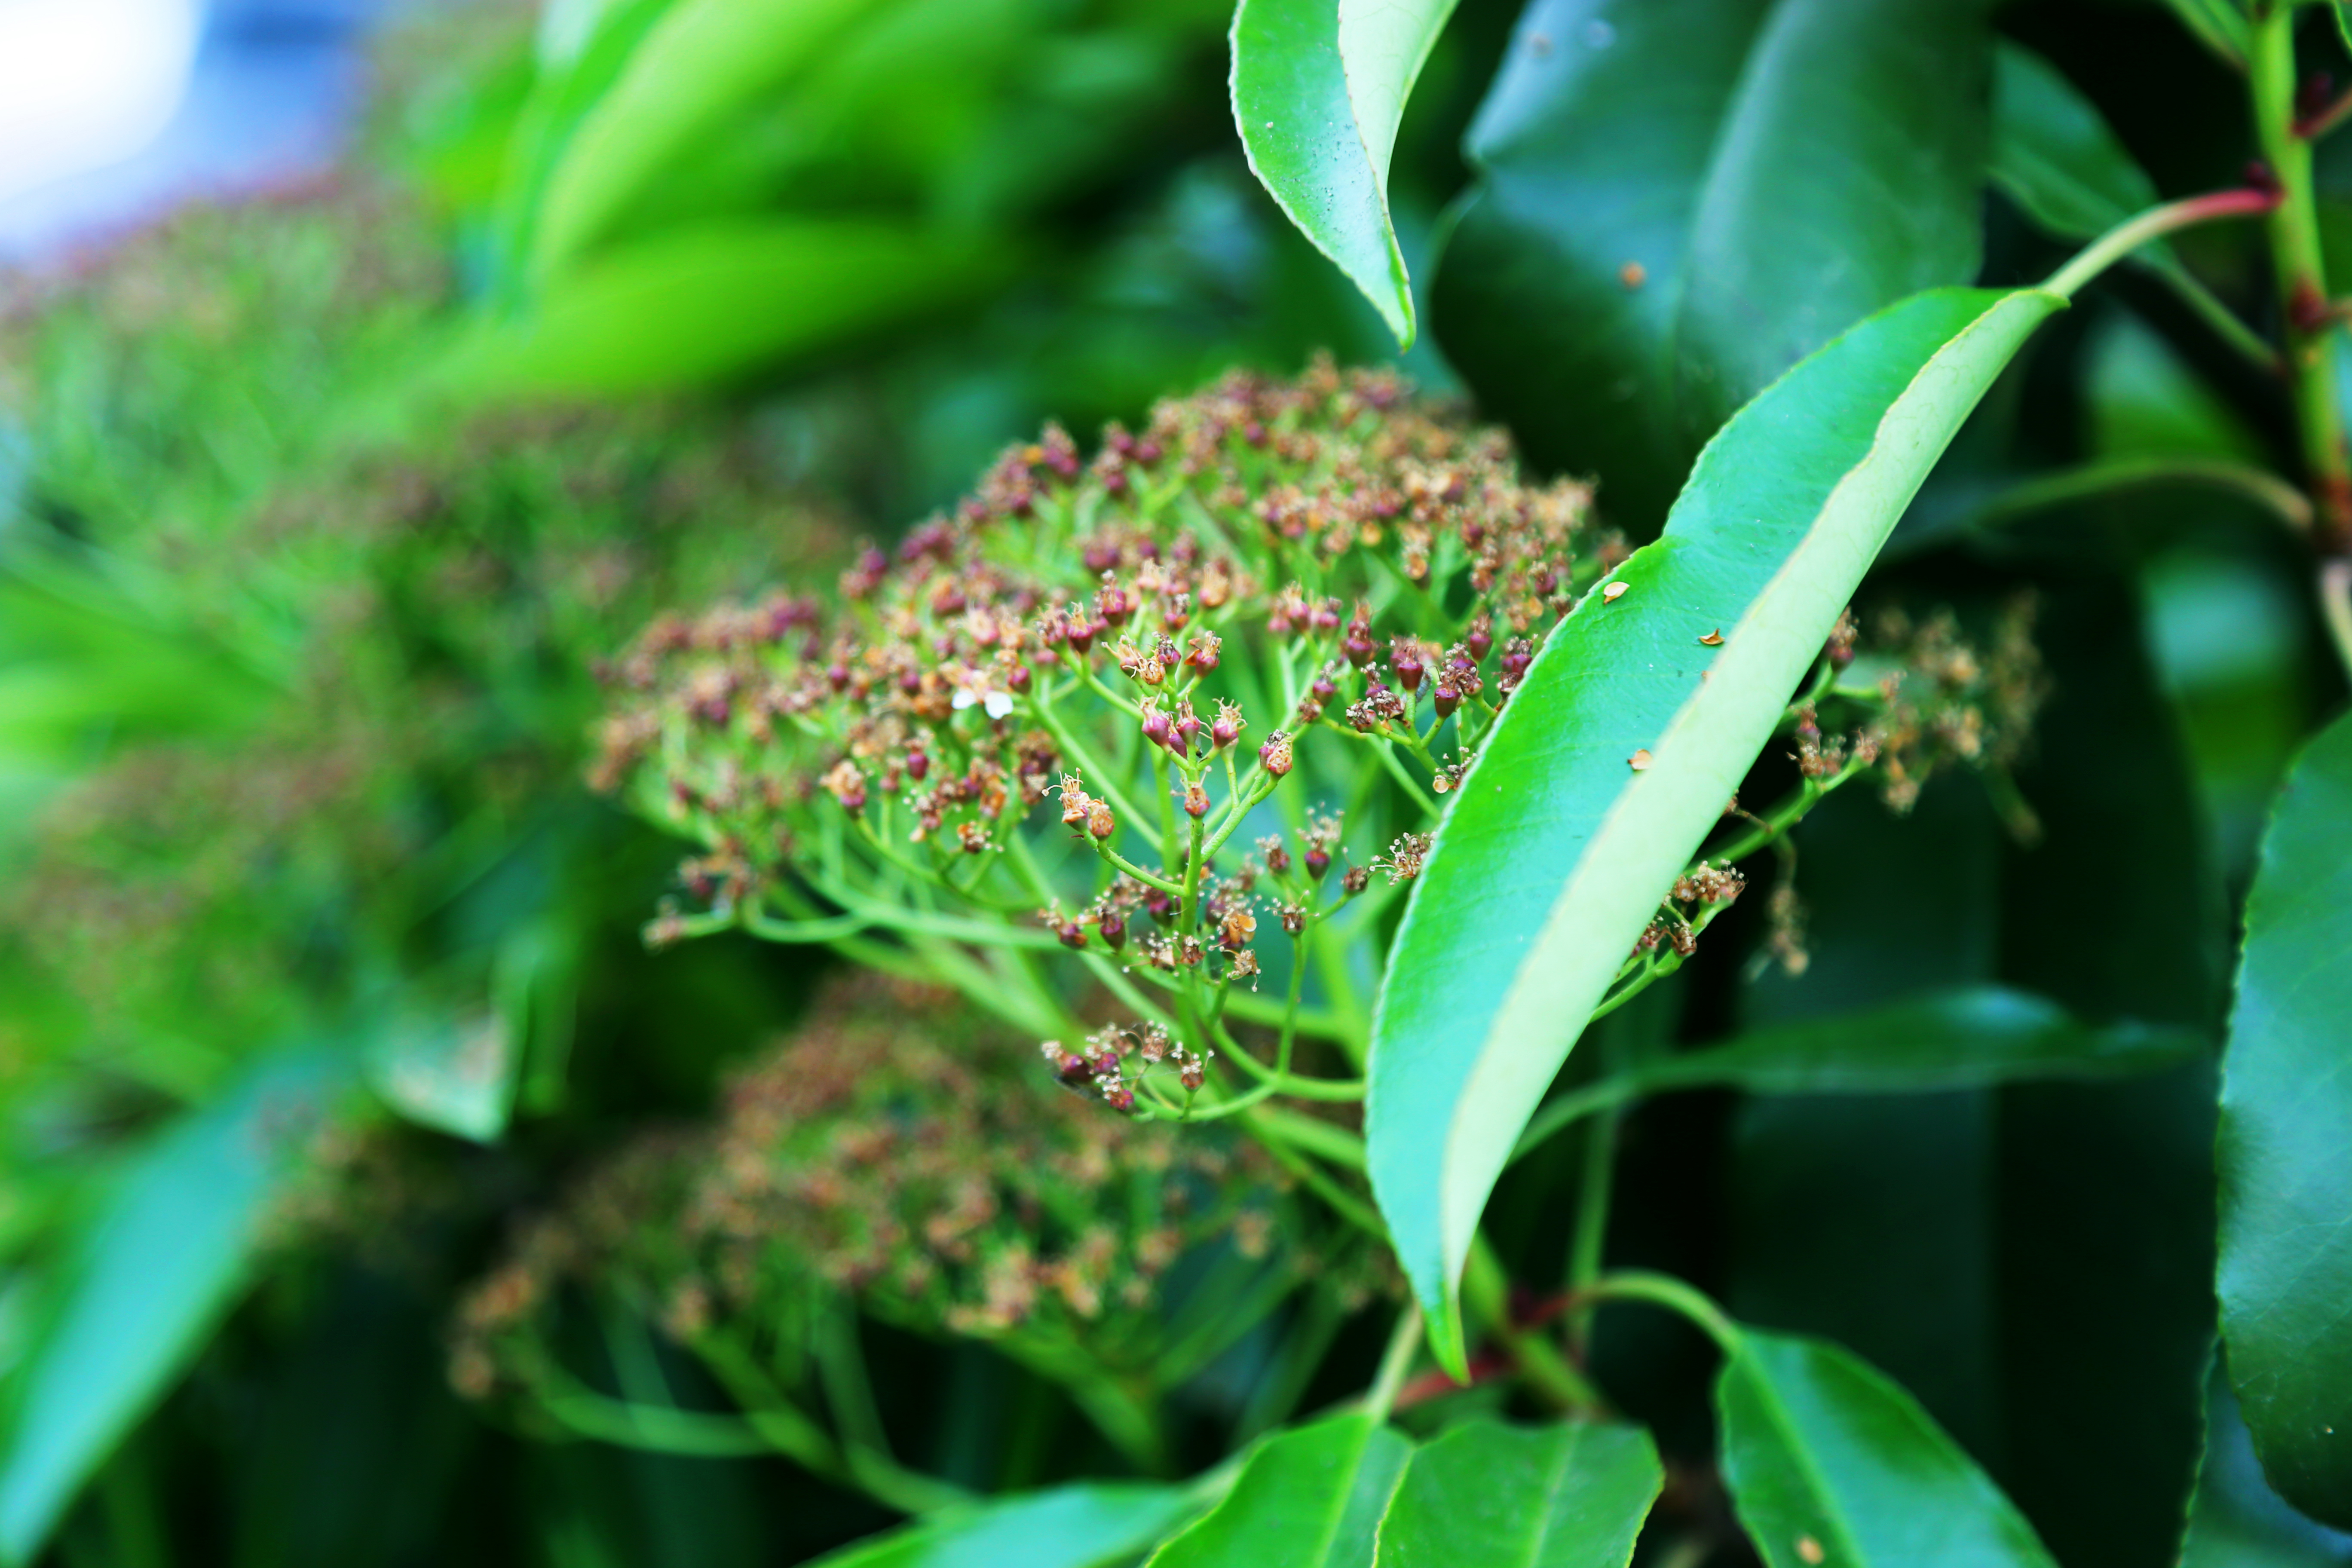 General 5472x3648 green plants flowers leaves nature closeup